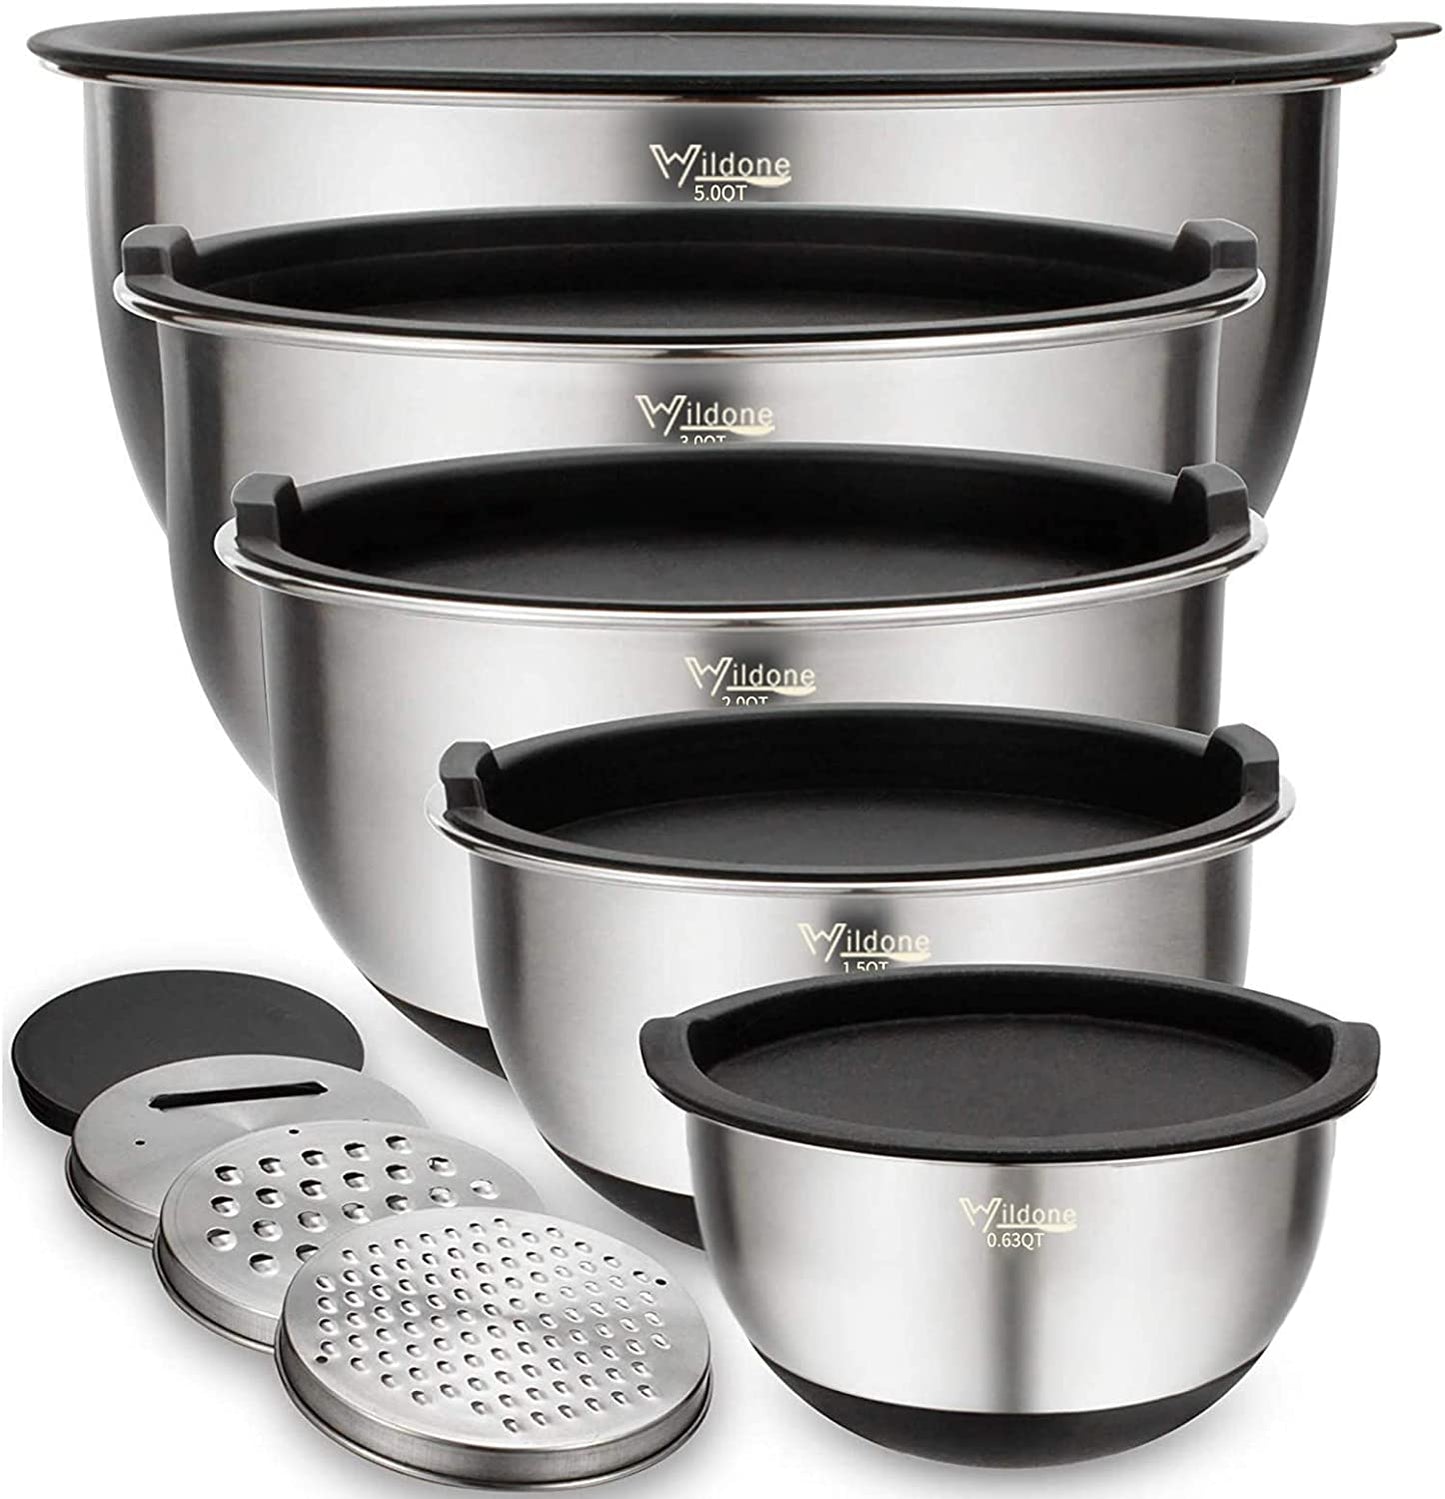 Stainless Steel Nesting Bowls with Airtight Lids & Measurement Marks